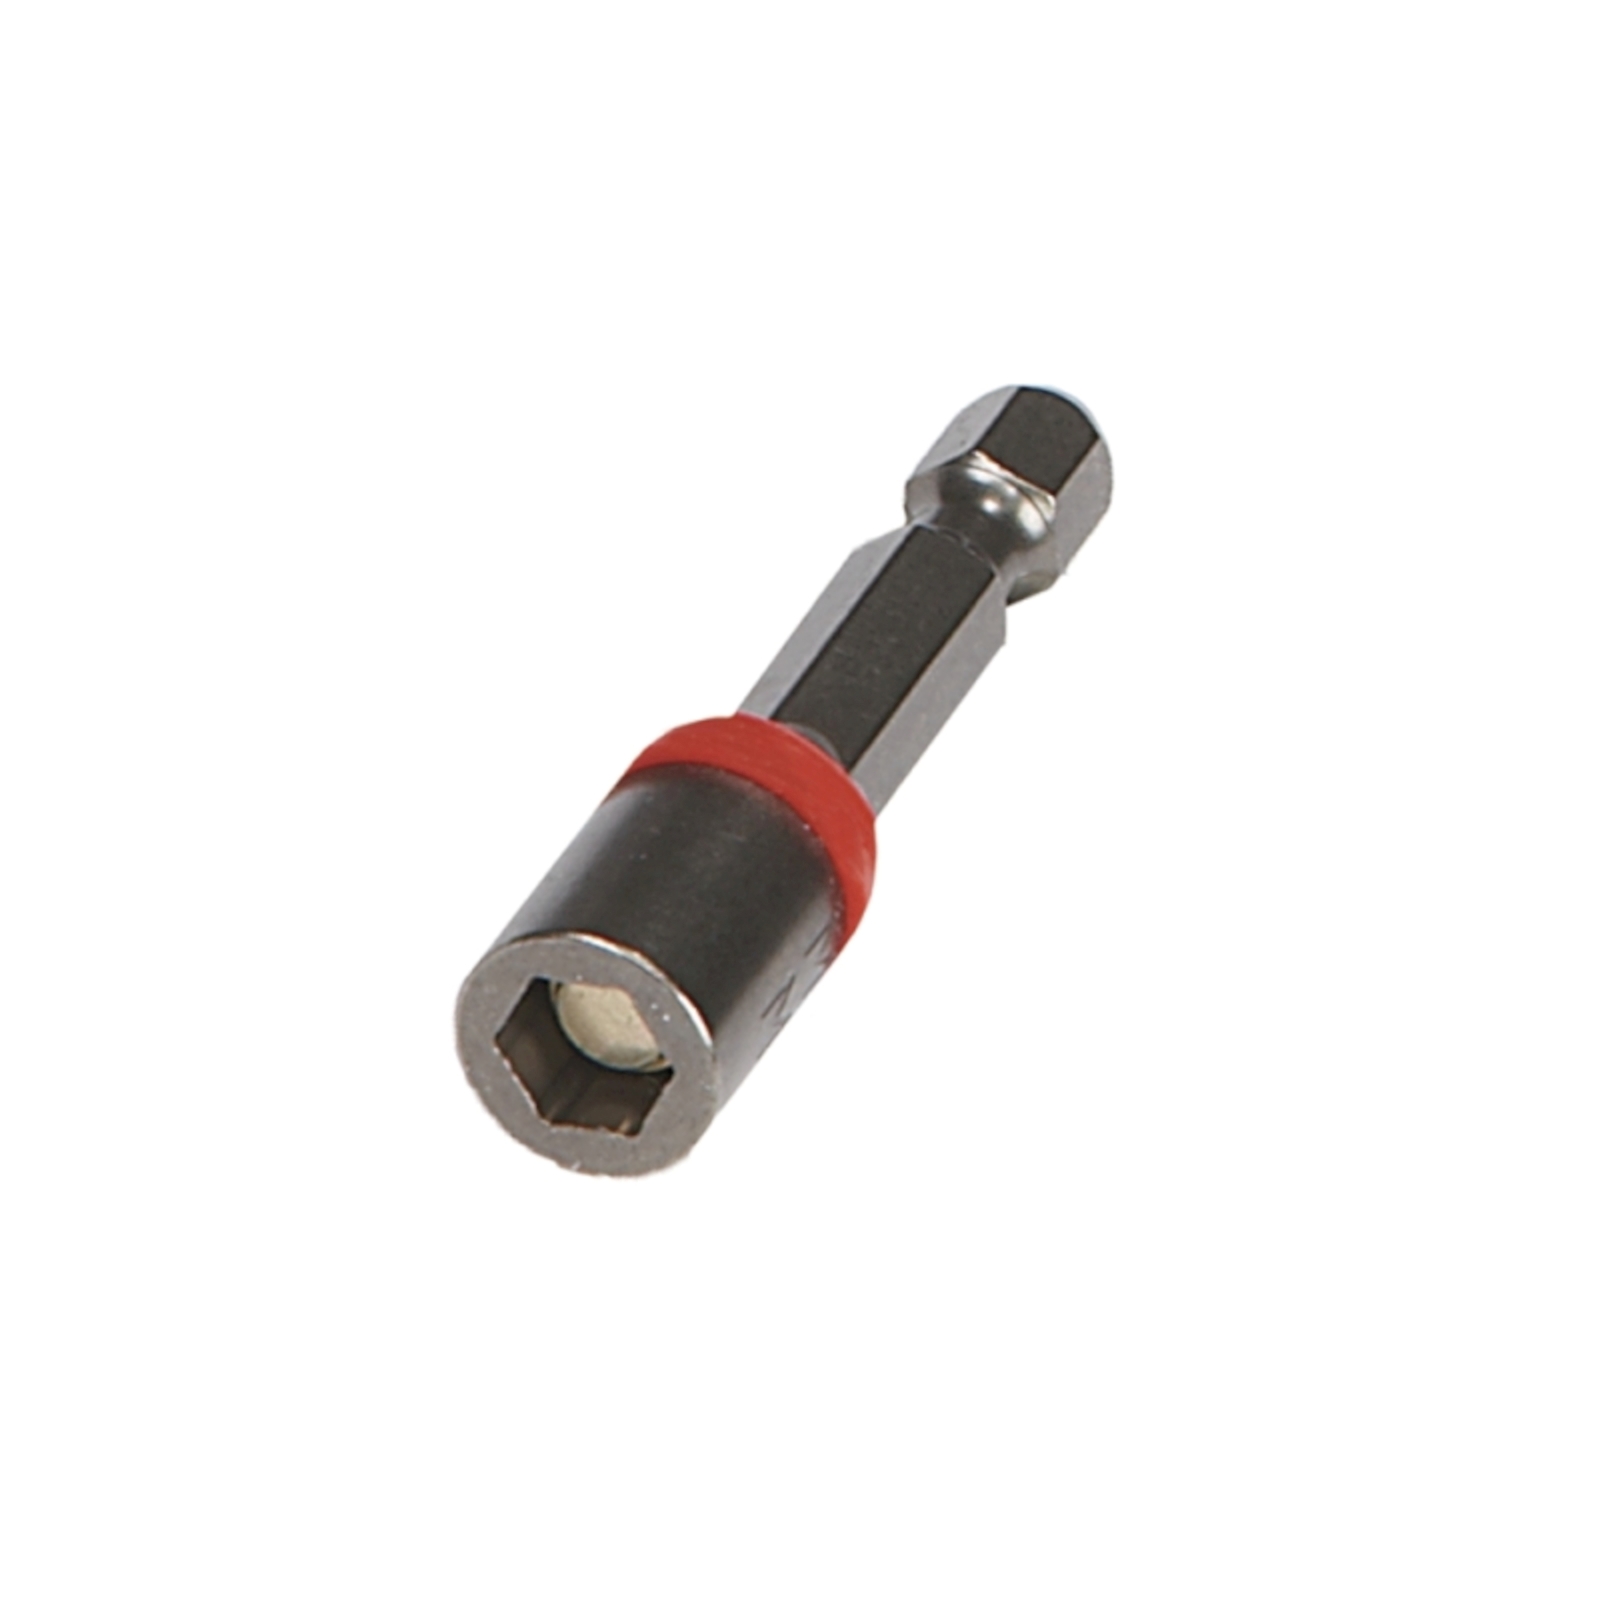 Short 1/4in. Magnetic Hex Driver - 100 pack